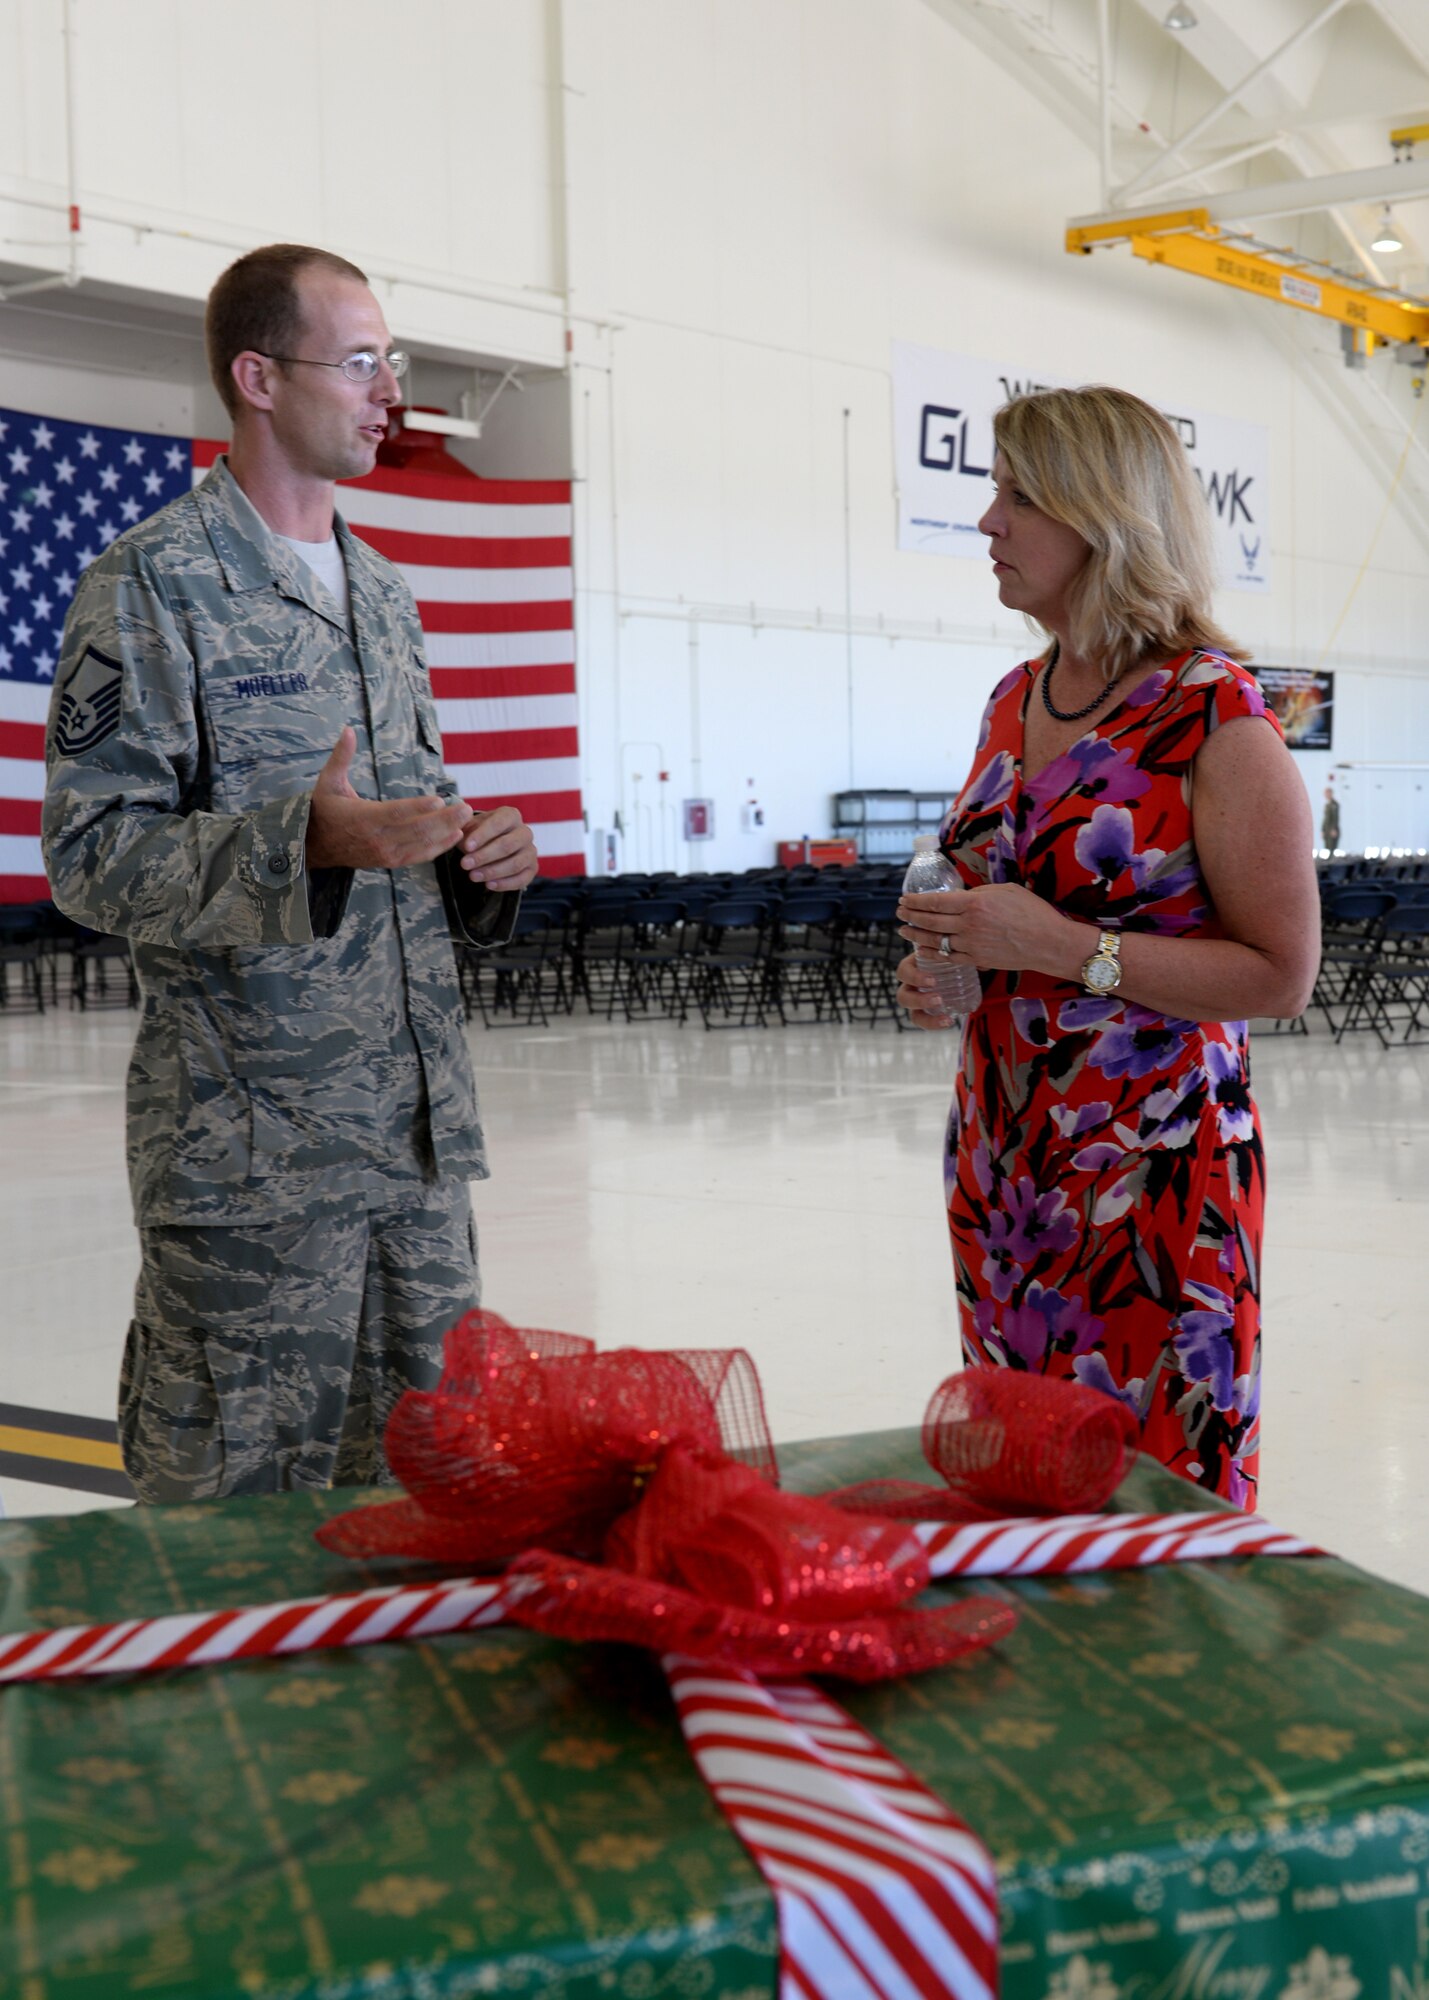 Master Sgt. Robert Mueller, 734th Air Mobility Squadron, discusses Operation Christmas Drop with the Secretary of the Air Force Deborah Lee James Nov. 19, 2014, on Andersen Air Force Base, Guam. Operation Christmas Drop is a joint venture between Andersen and Yokota Air Base, Japan, that uses mobility training missions to drop several tons of humanitarian supplies to dozens of remote Pacific islands every December and is the world's longest running airdrop operation in the world at 62 years running. James saw first-hand how Andersen Airmen contribute to the ongoing rebalance to the Pacific as well as their role to ensuring peace and security in the region. (U.S. Air Force photo by Airman 1st Class Amanda Morris/Released)